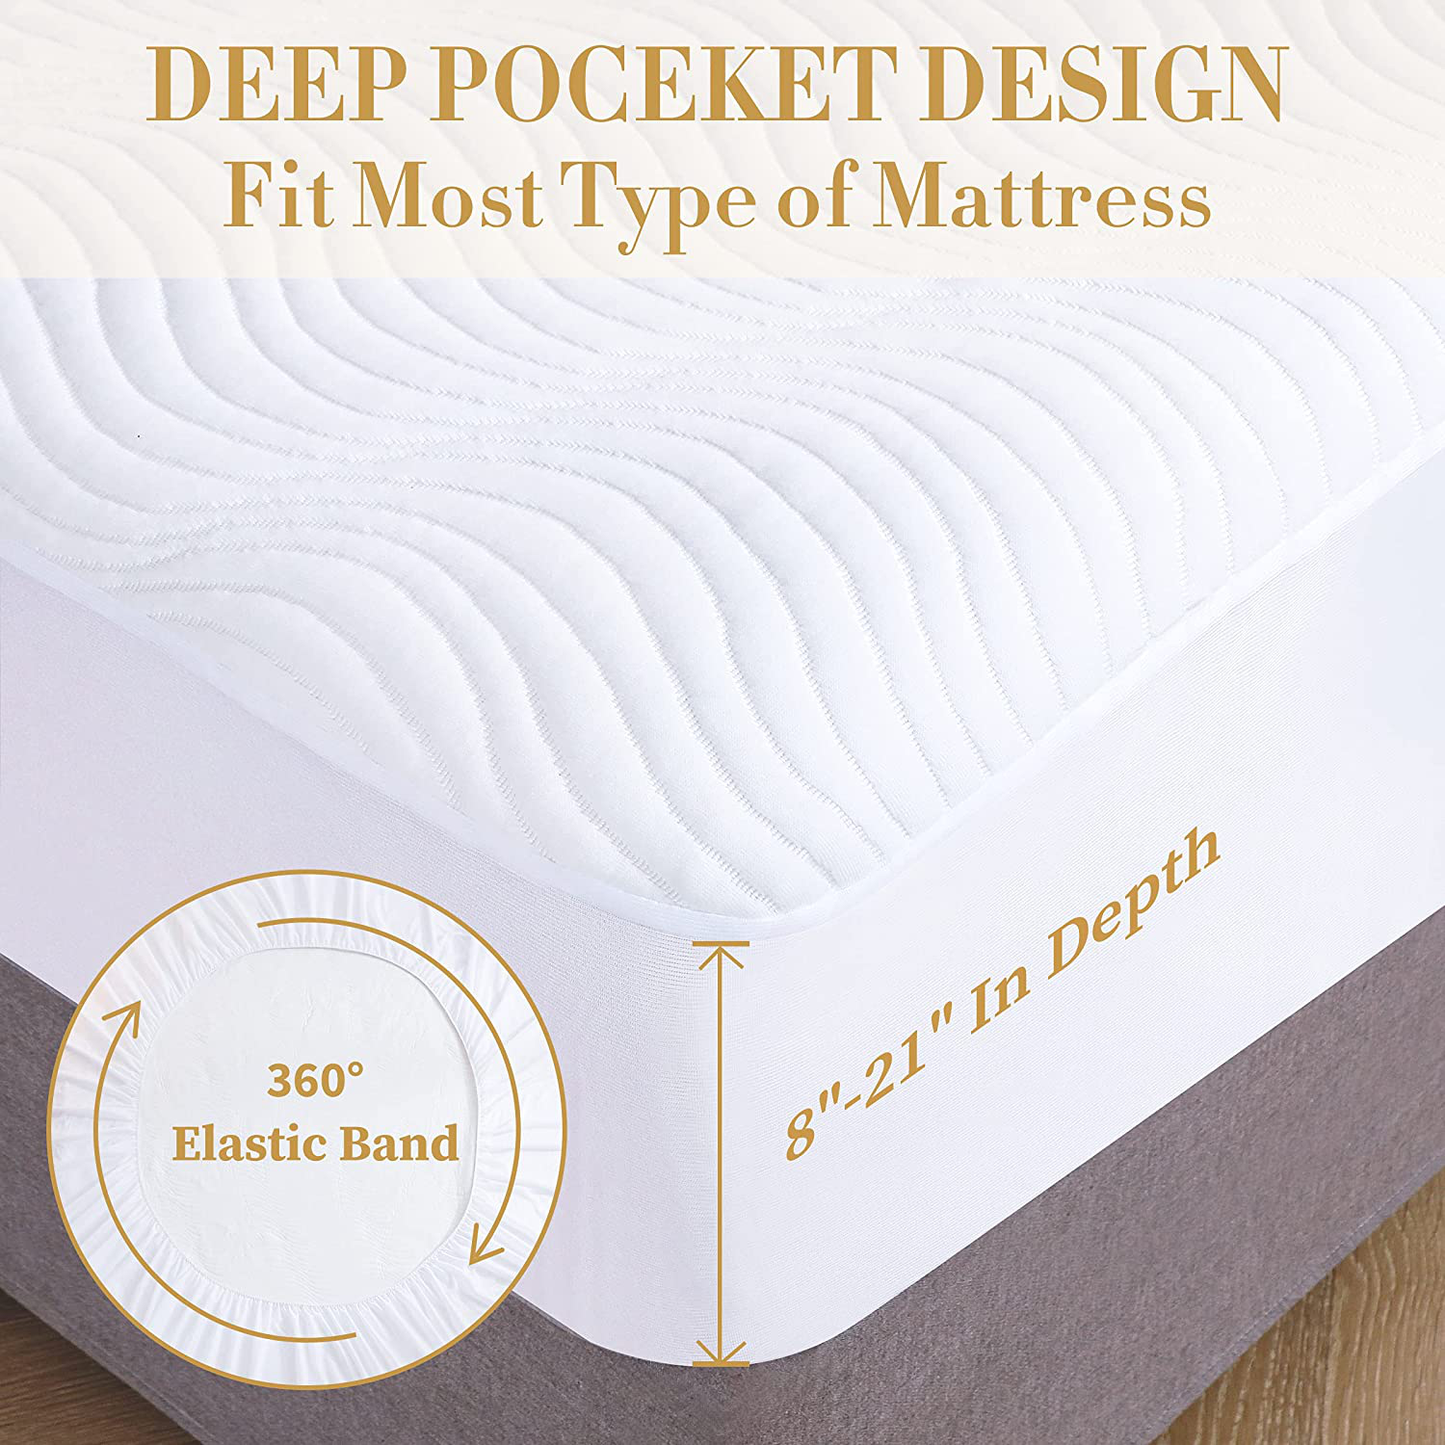 Full Size Waterproof Mattress Pad, 3D Air Fiber Fabric Mattress Protector, Stain Release Breathable Smooth Mattress Cover Stretches Up to 21" Inches Deep Pocket